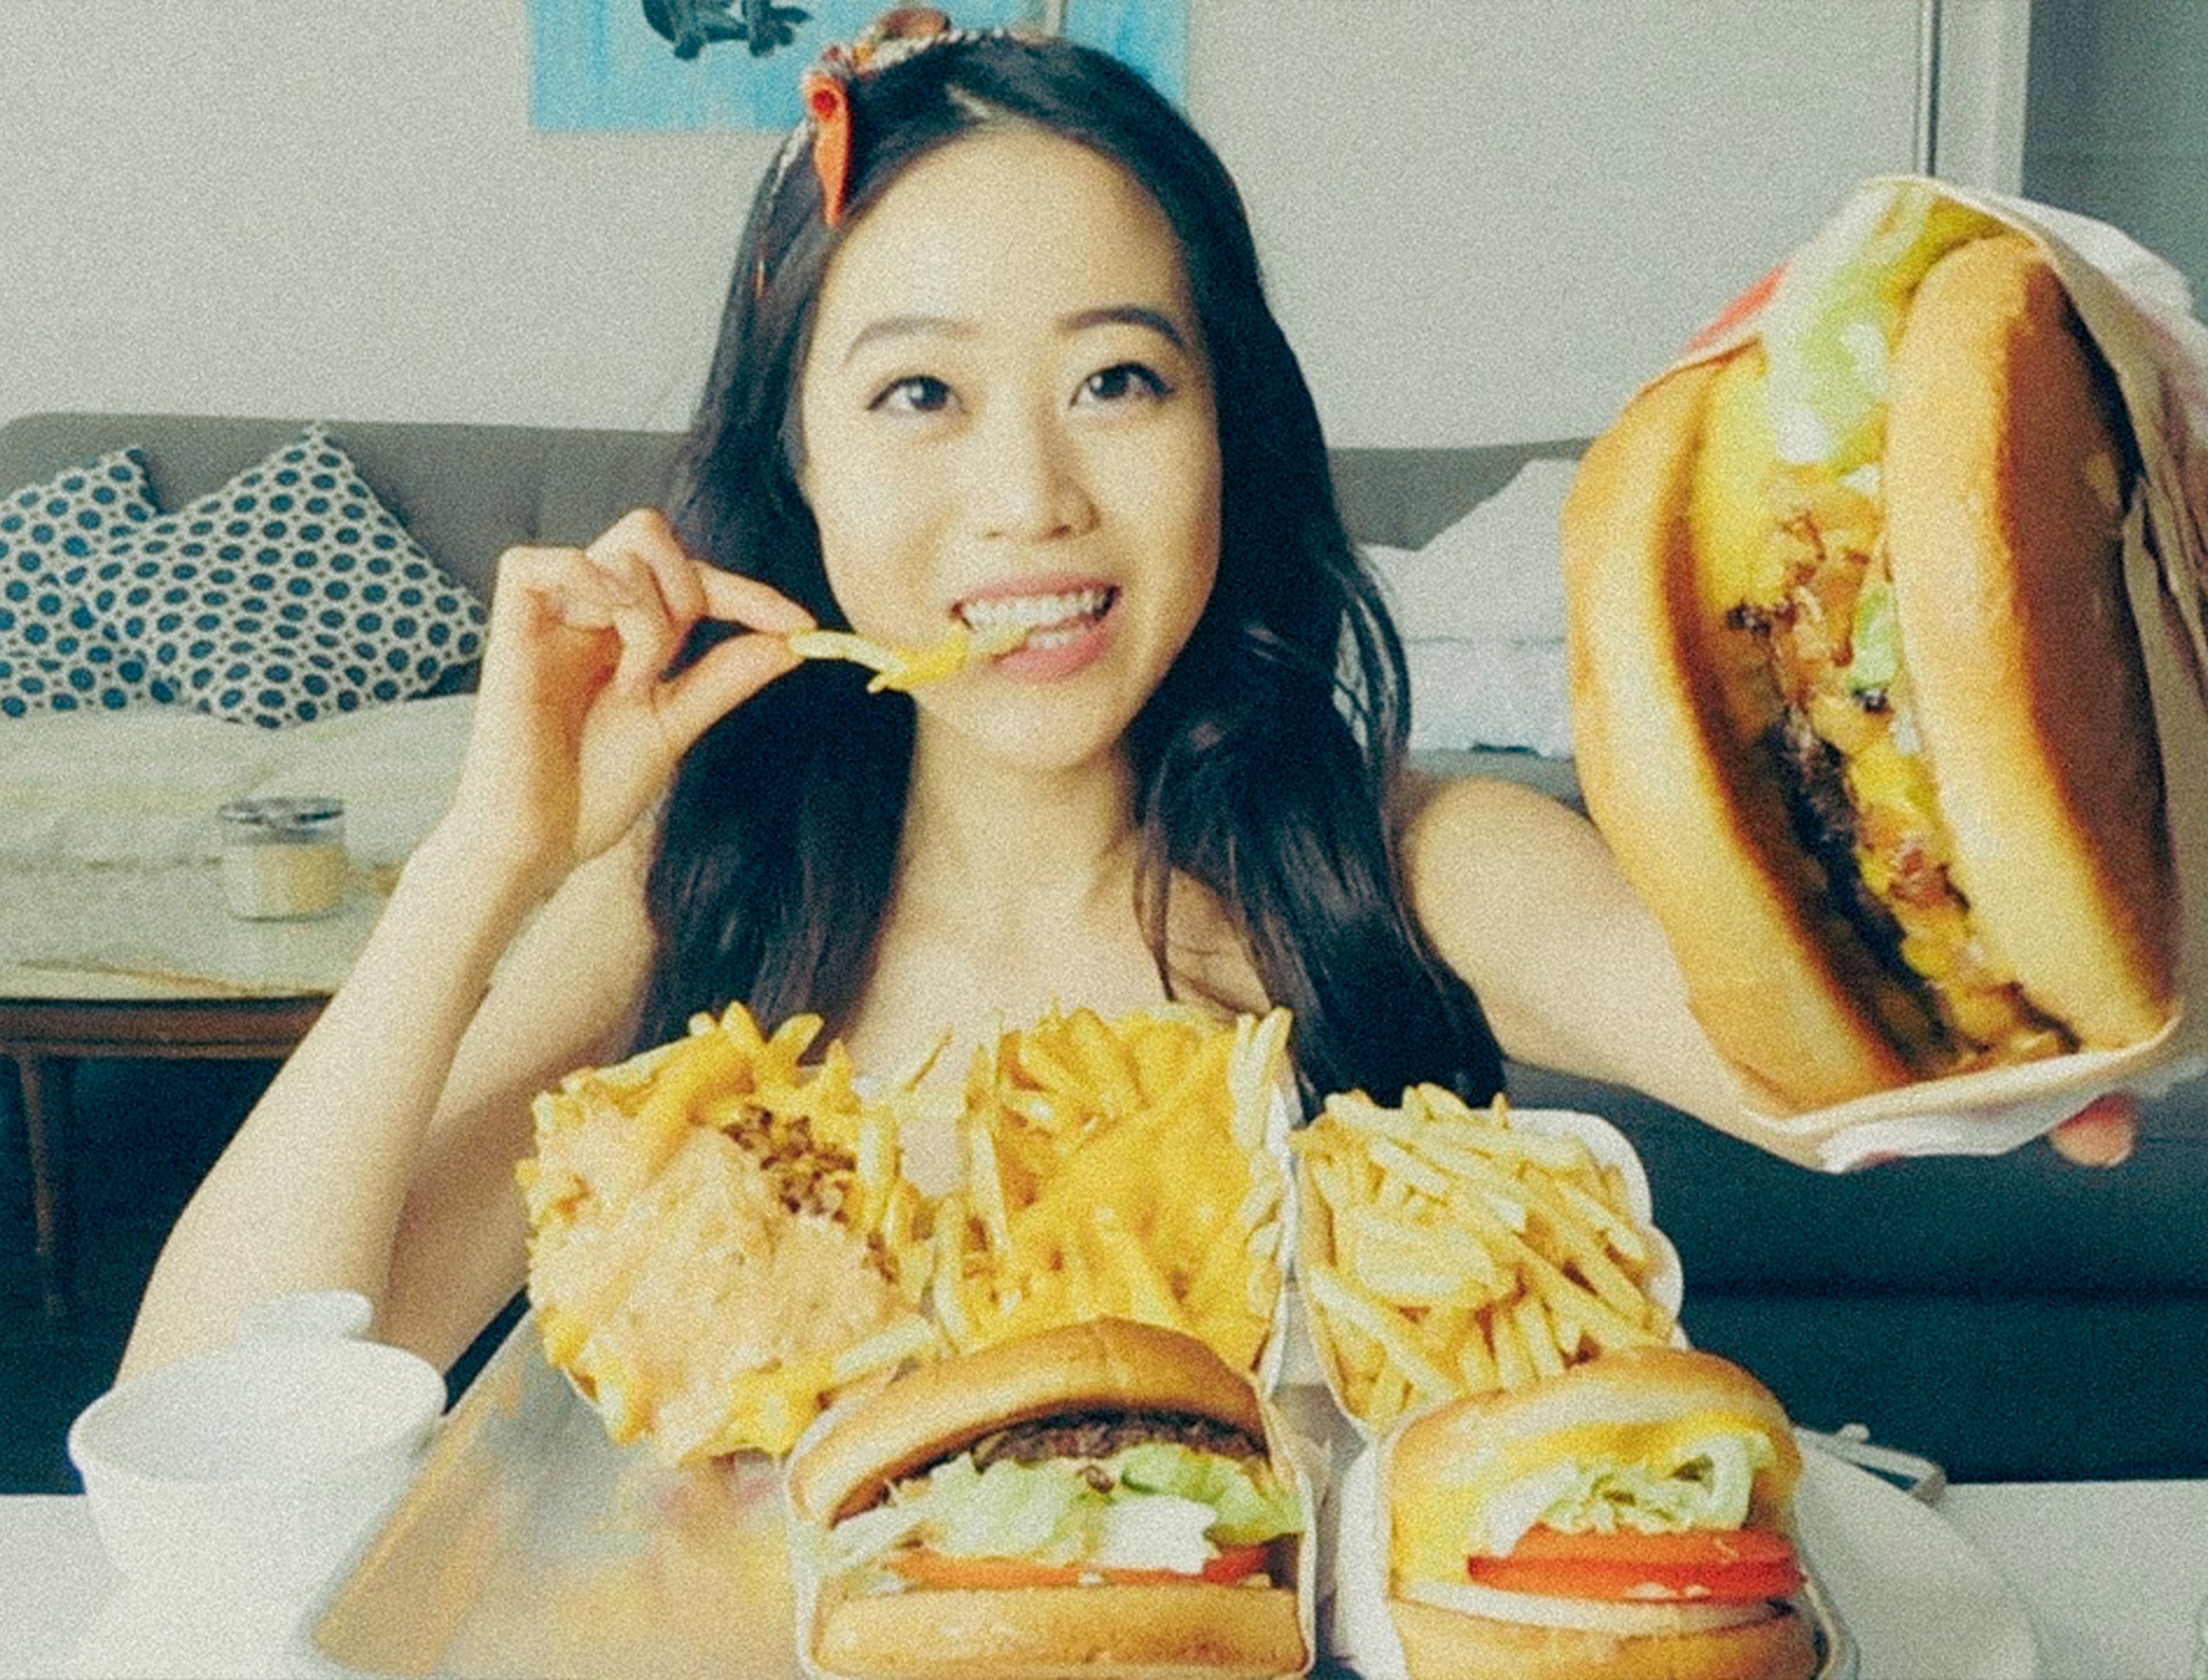 Mukbang: The Eating Trend Everyone Is Obsessed With